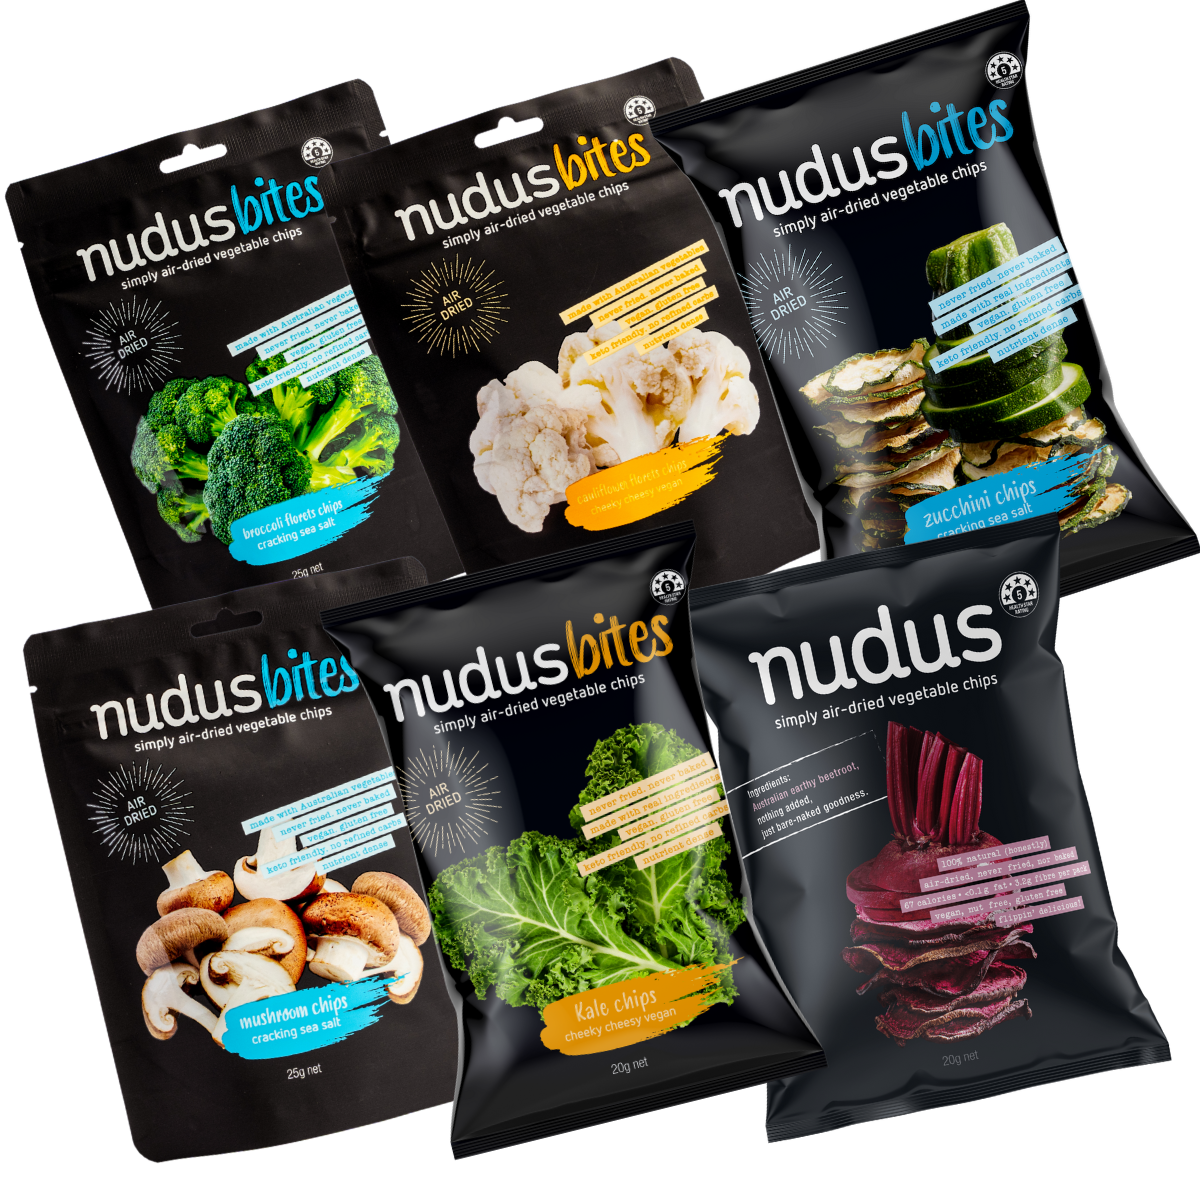 Mixed Vegetable Chips Box - 12 bags ($3.33 / 25g bag)